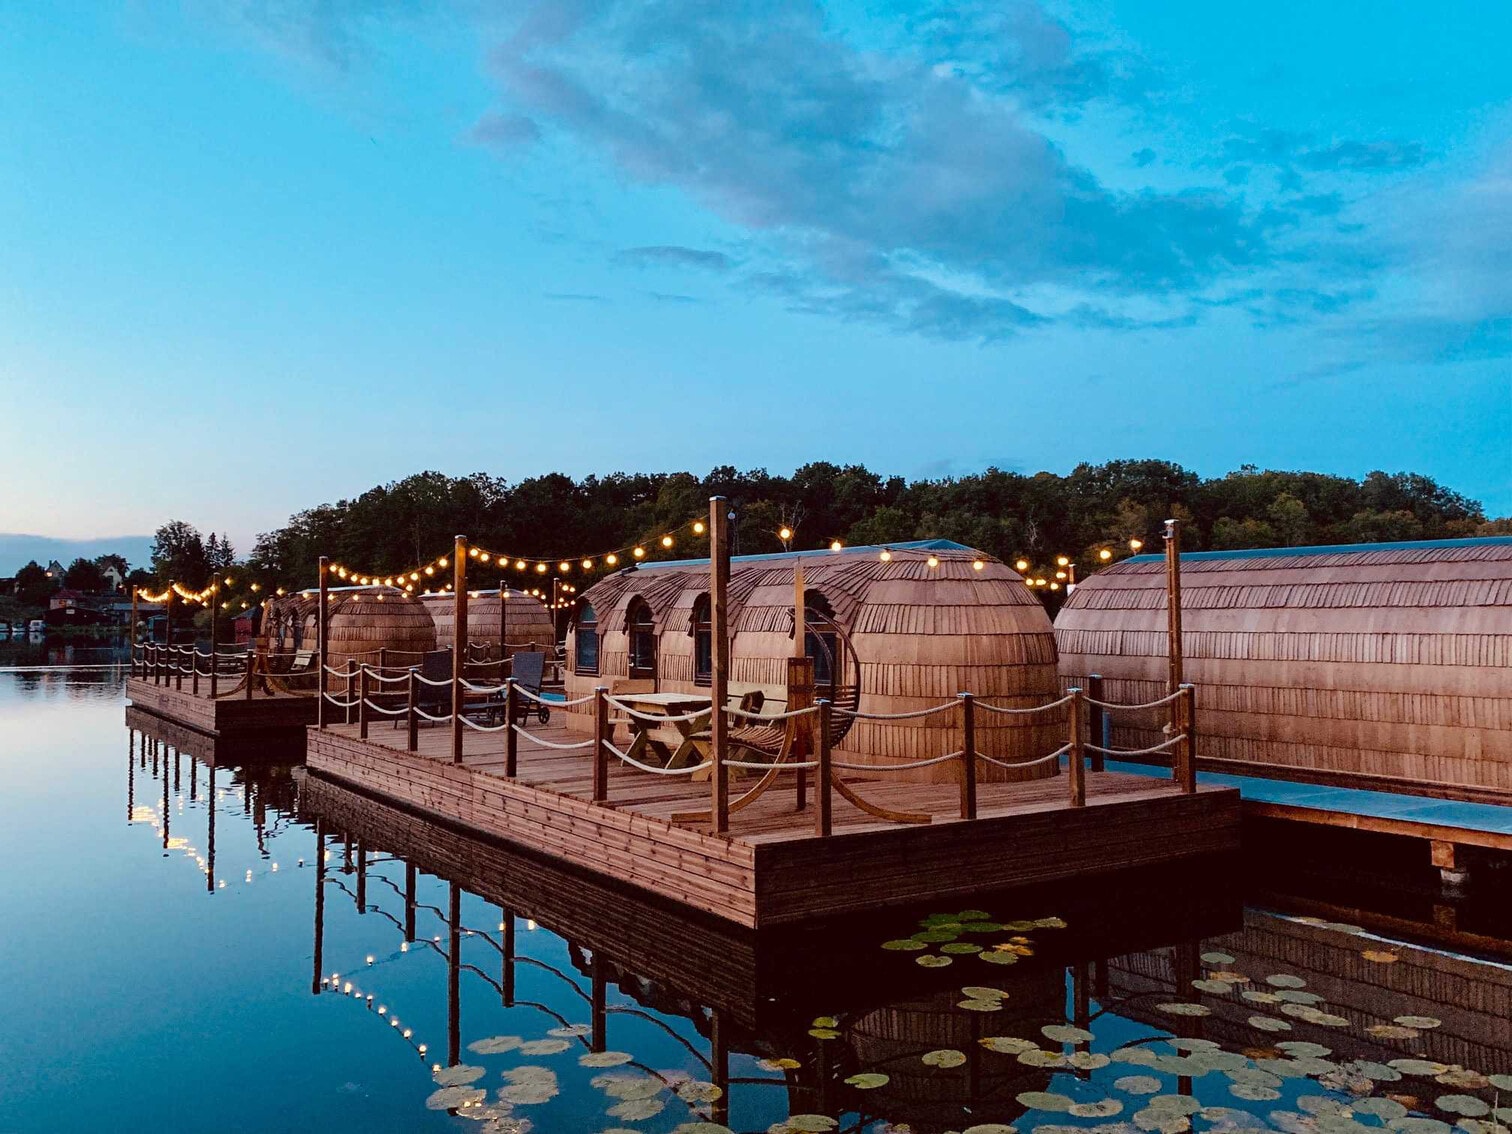 Cabins floating on water